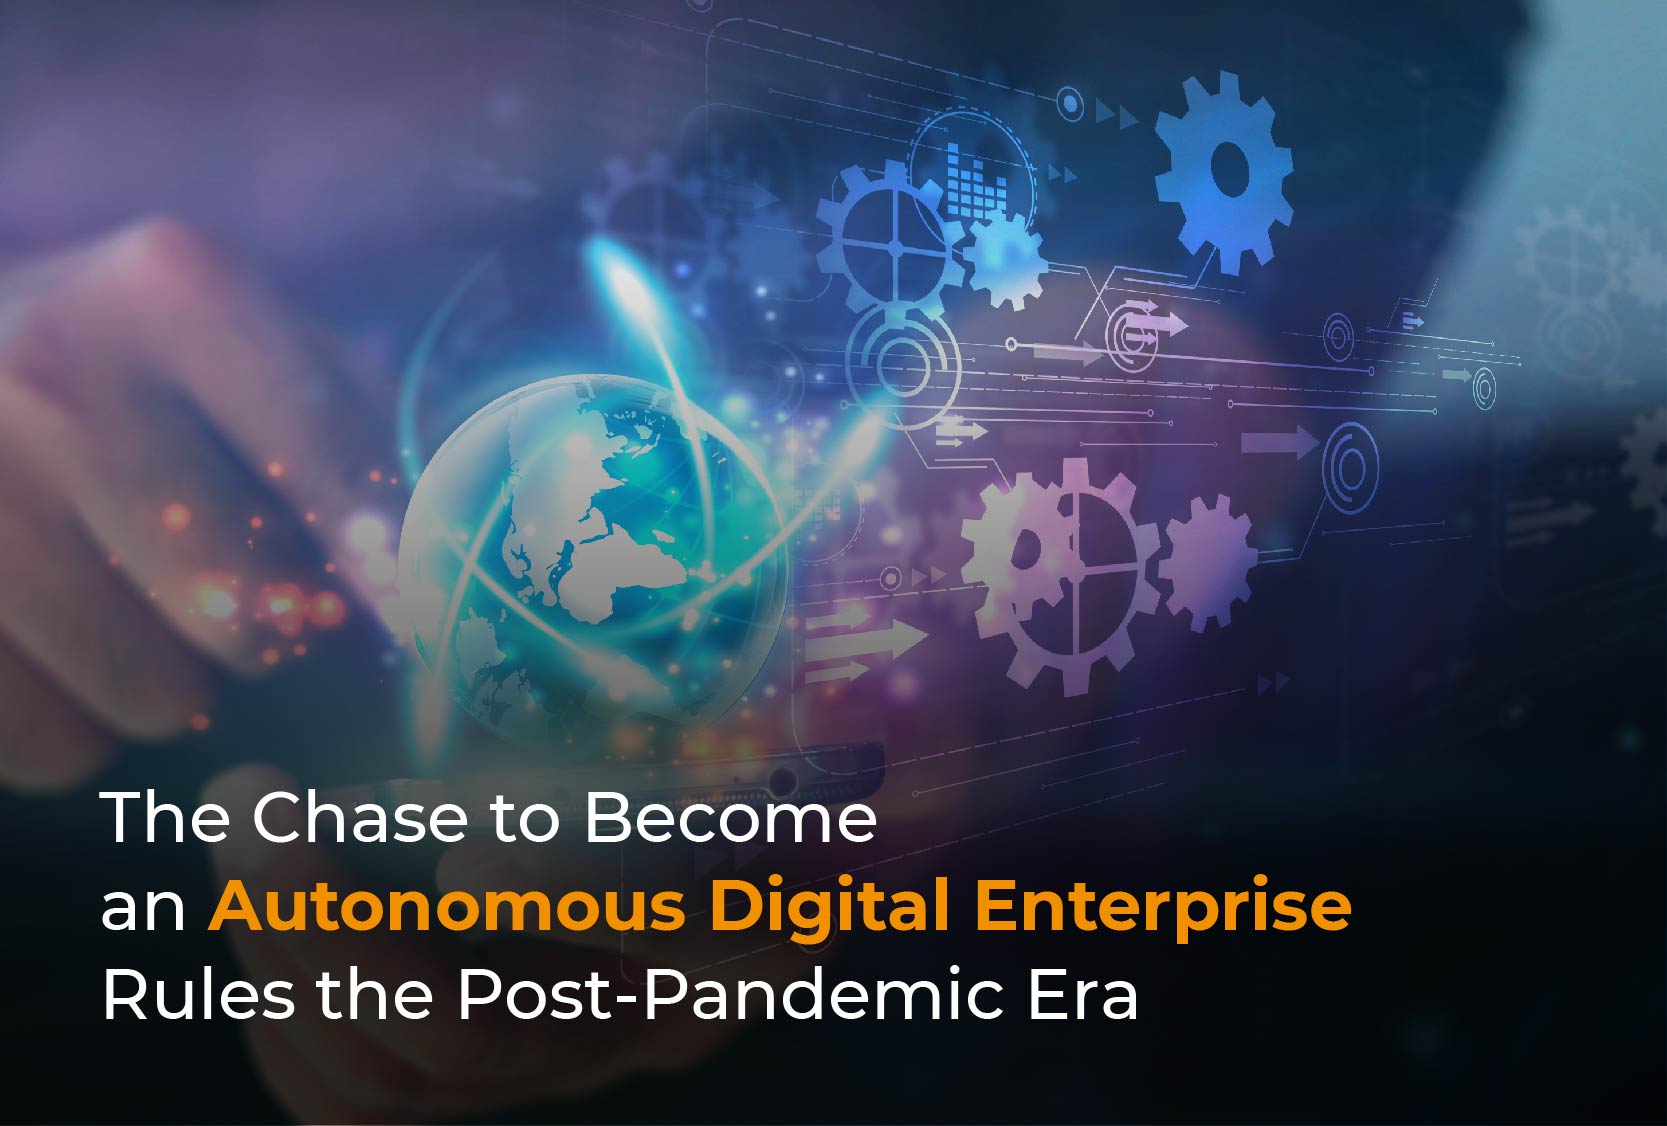 The Chase to Become an Autonomous Digital Enterprise Rules the Post-Pandemic Era